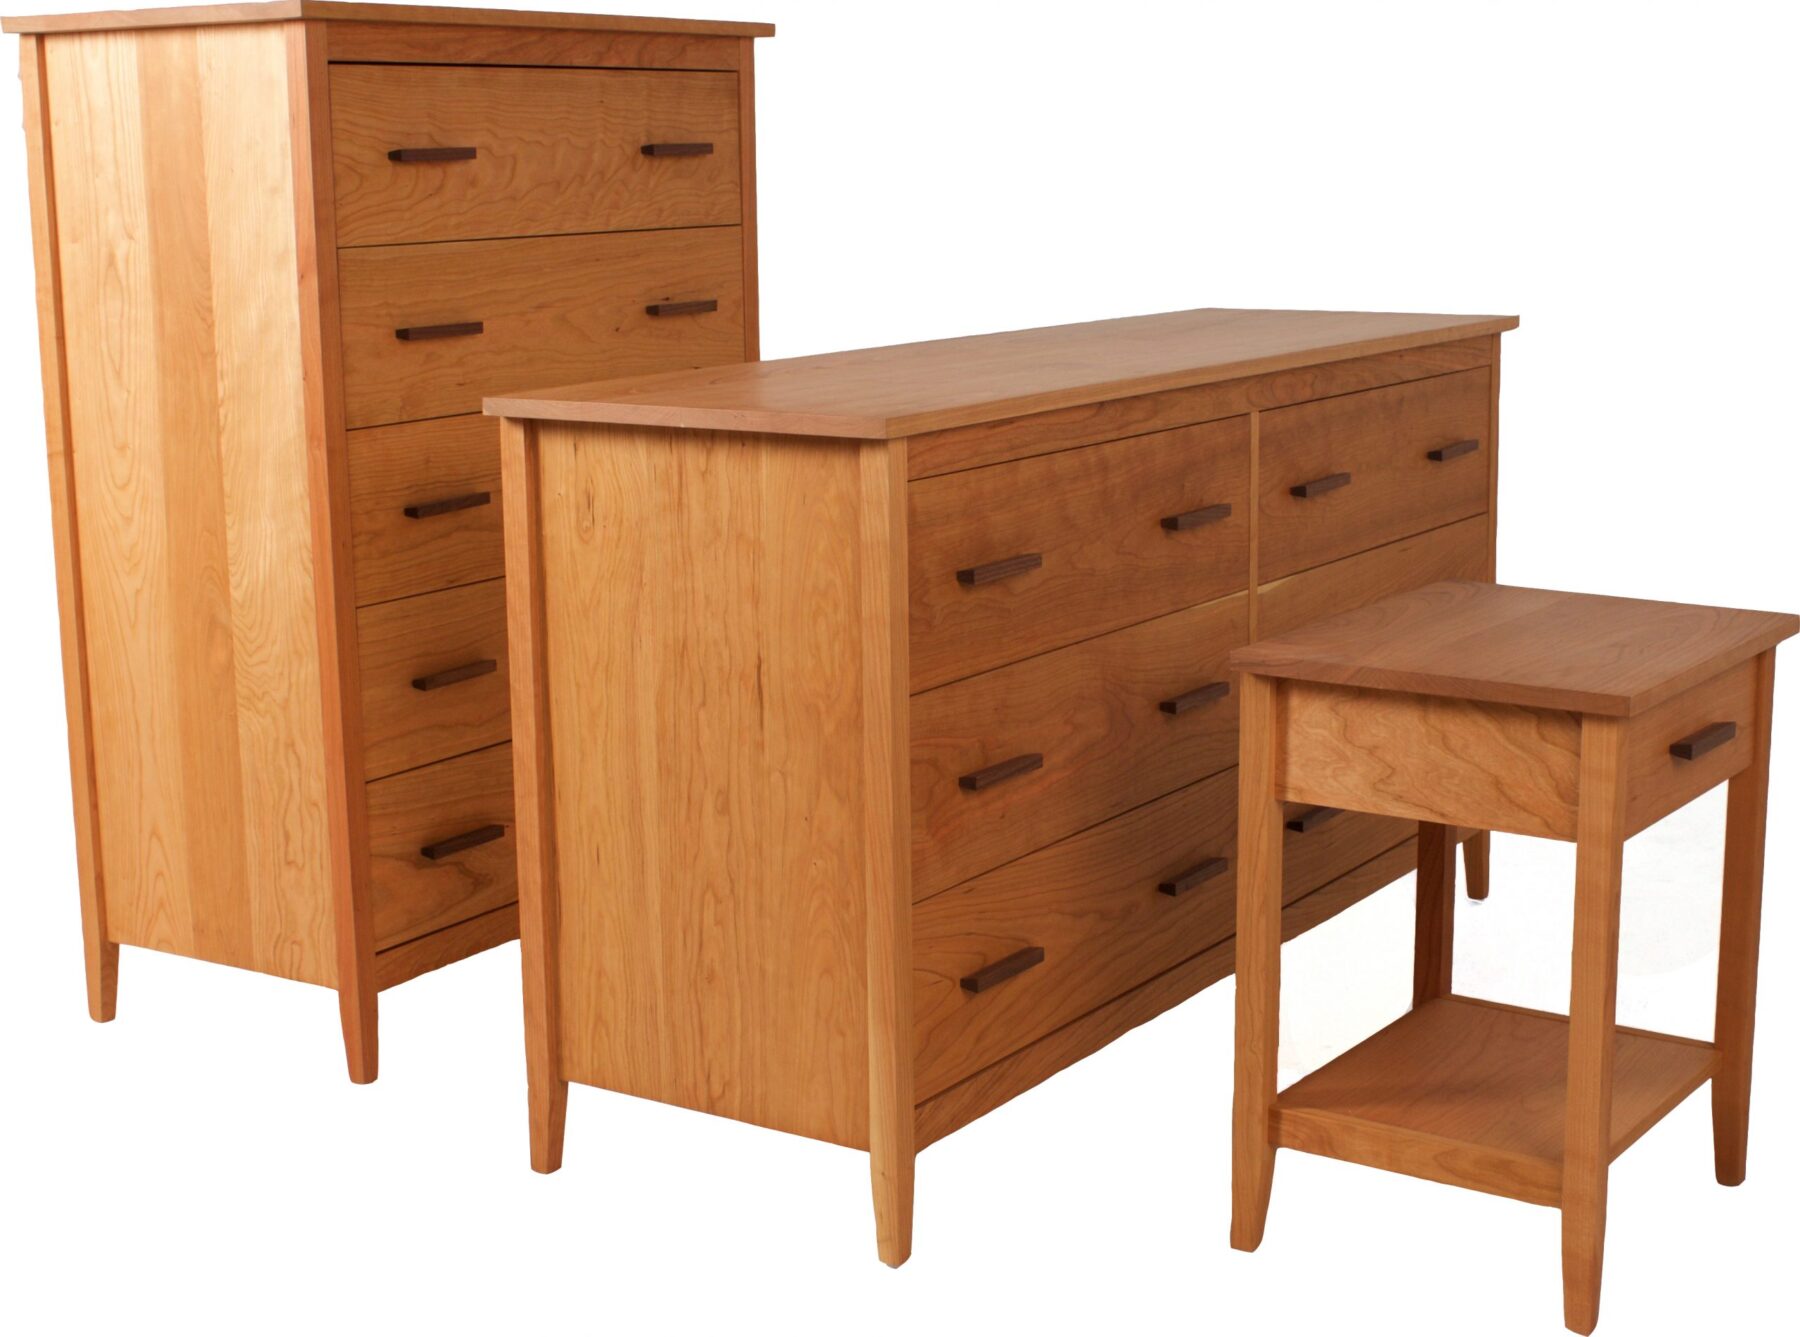 Chest-Dresser-Night Table-Angled